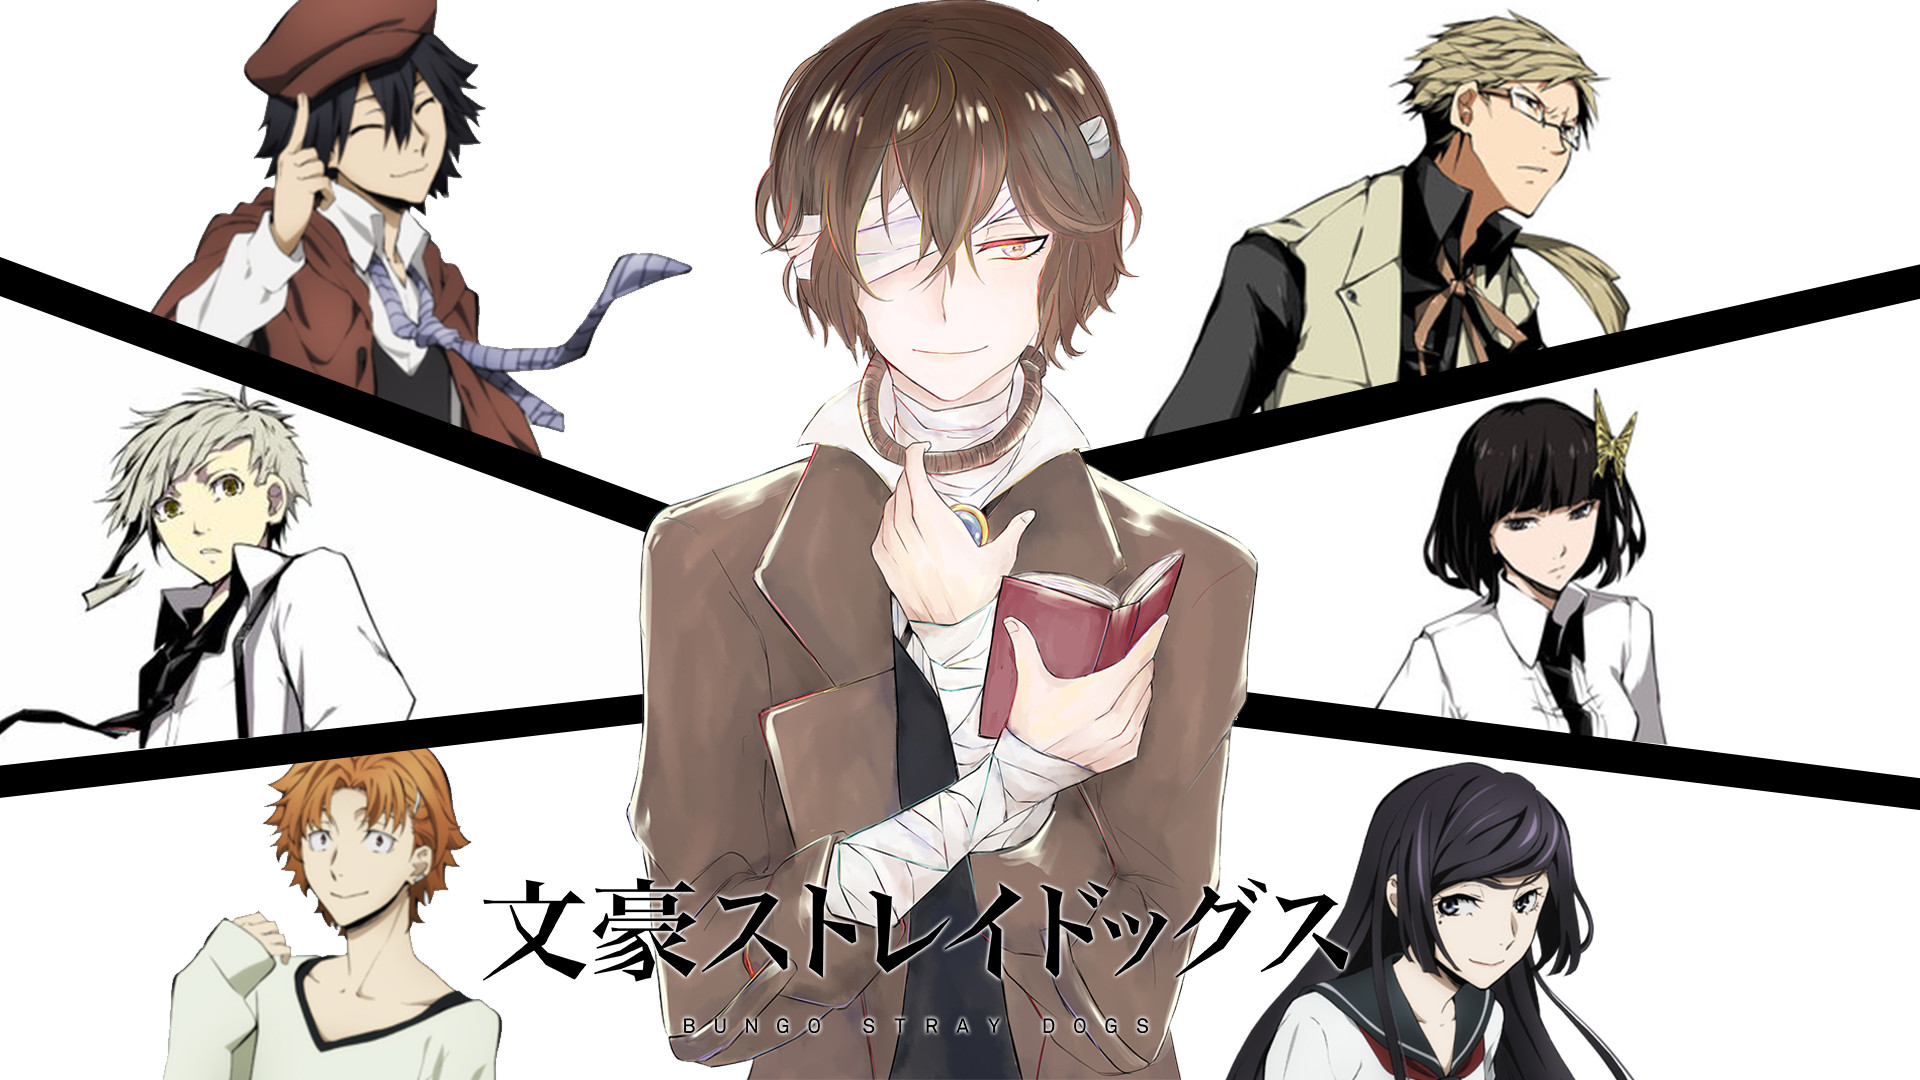 Bungo Stray Dogs Wallpaper - Bungo Stray Dogs Wallpapers ...